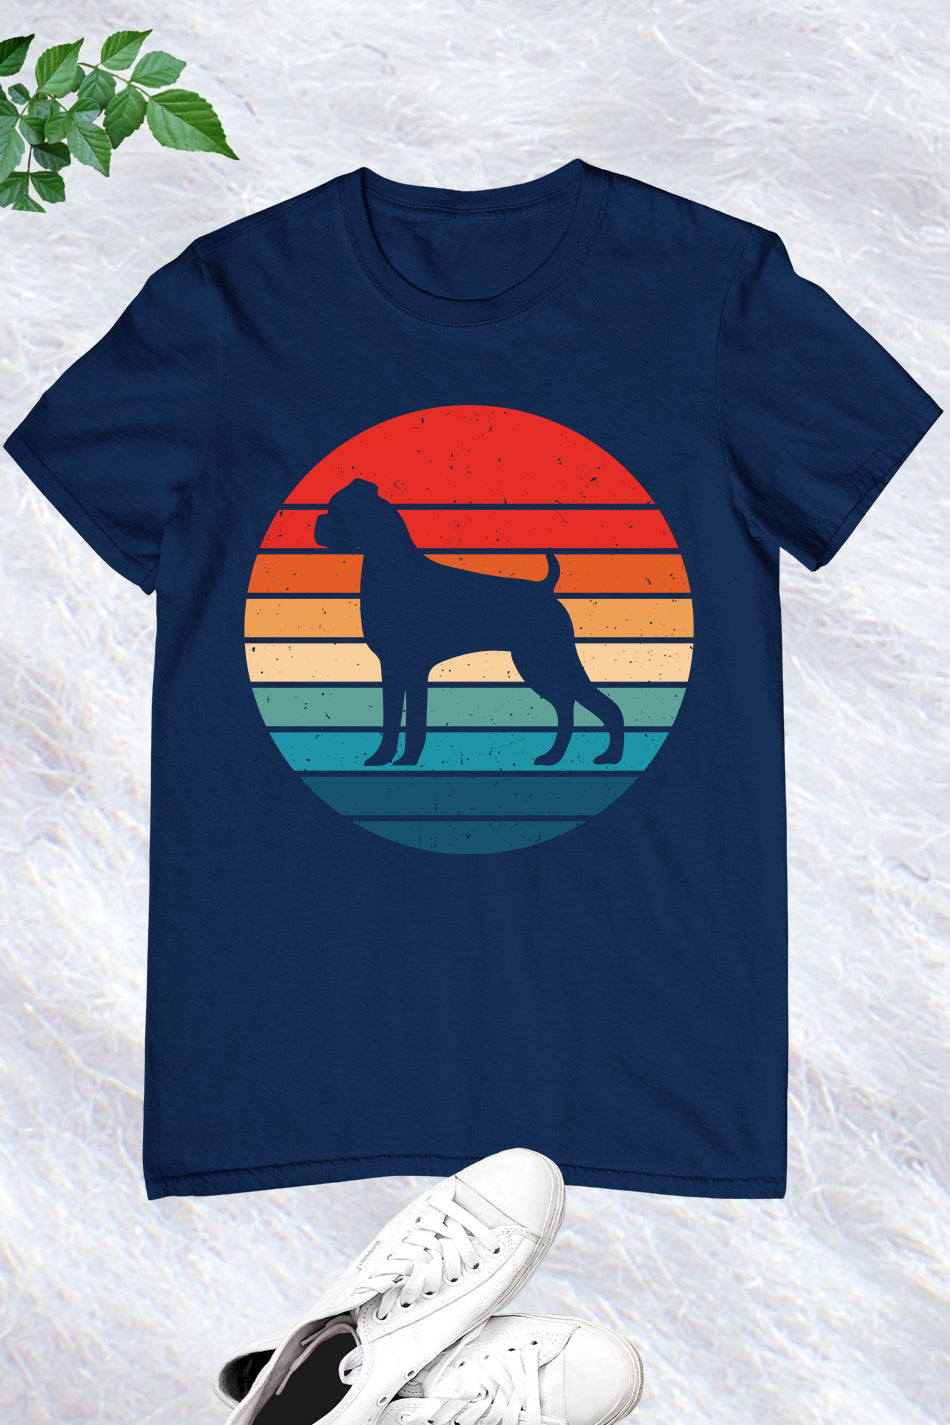 This Boxer Dog Shirt is expertly designed with the unique features of the Boxer breed in mind. Made from high-quality materials, it provides comfort and style for any dog lover. Show off your love for Boxers with this scientific and objective piece of apparel.